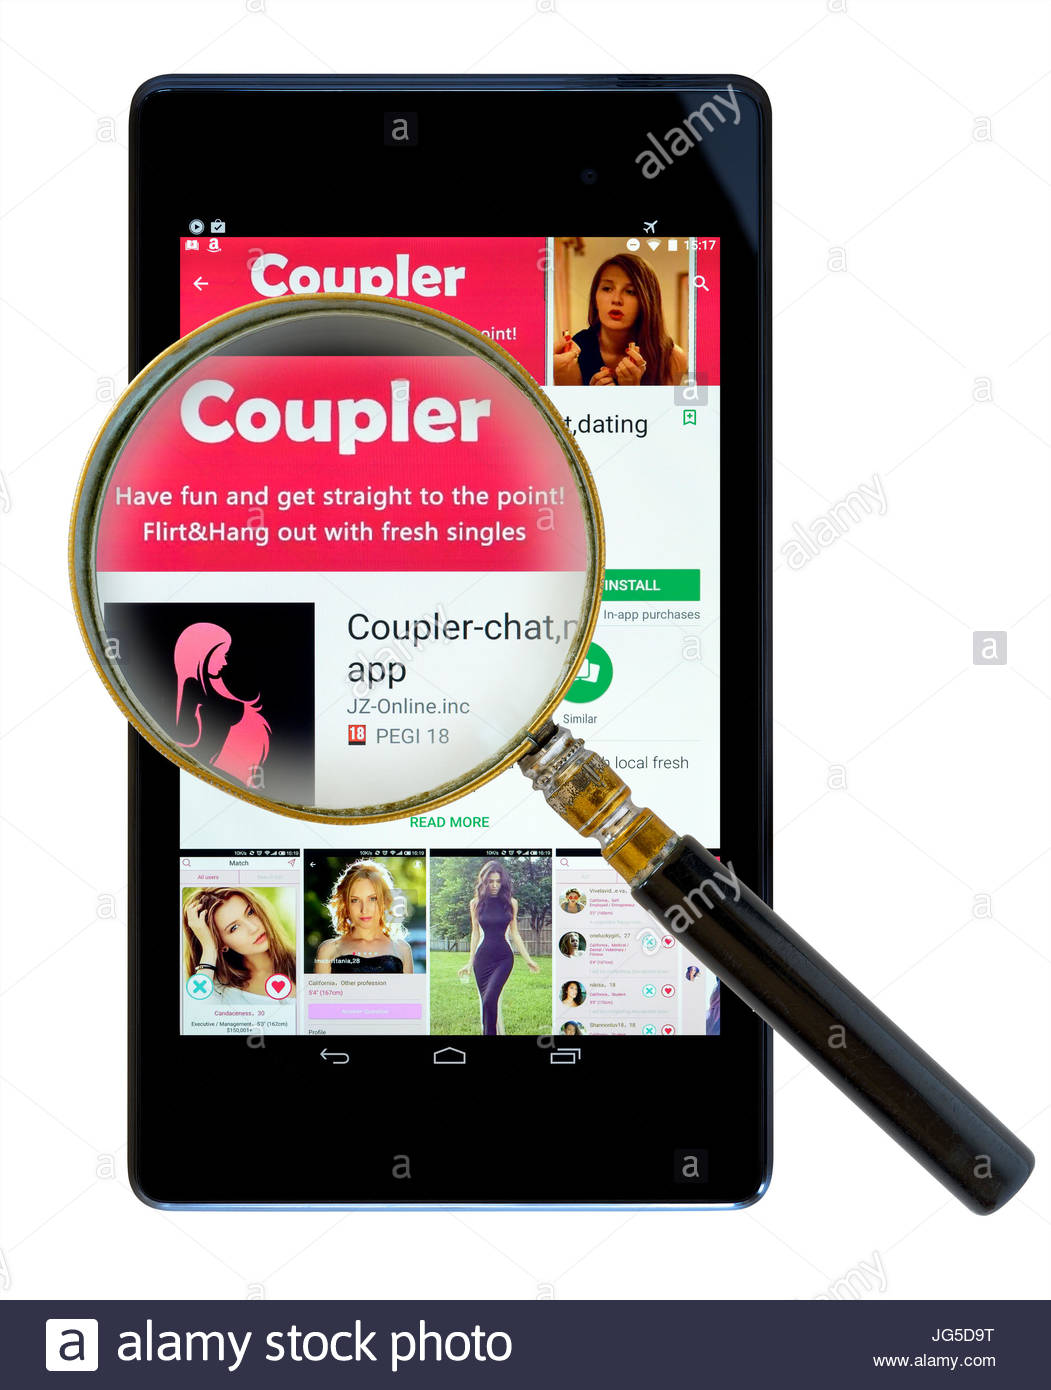 Coupler-chat meet dating